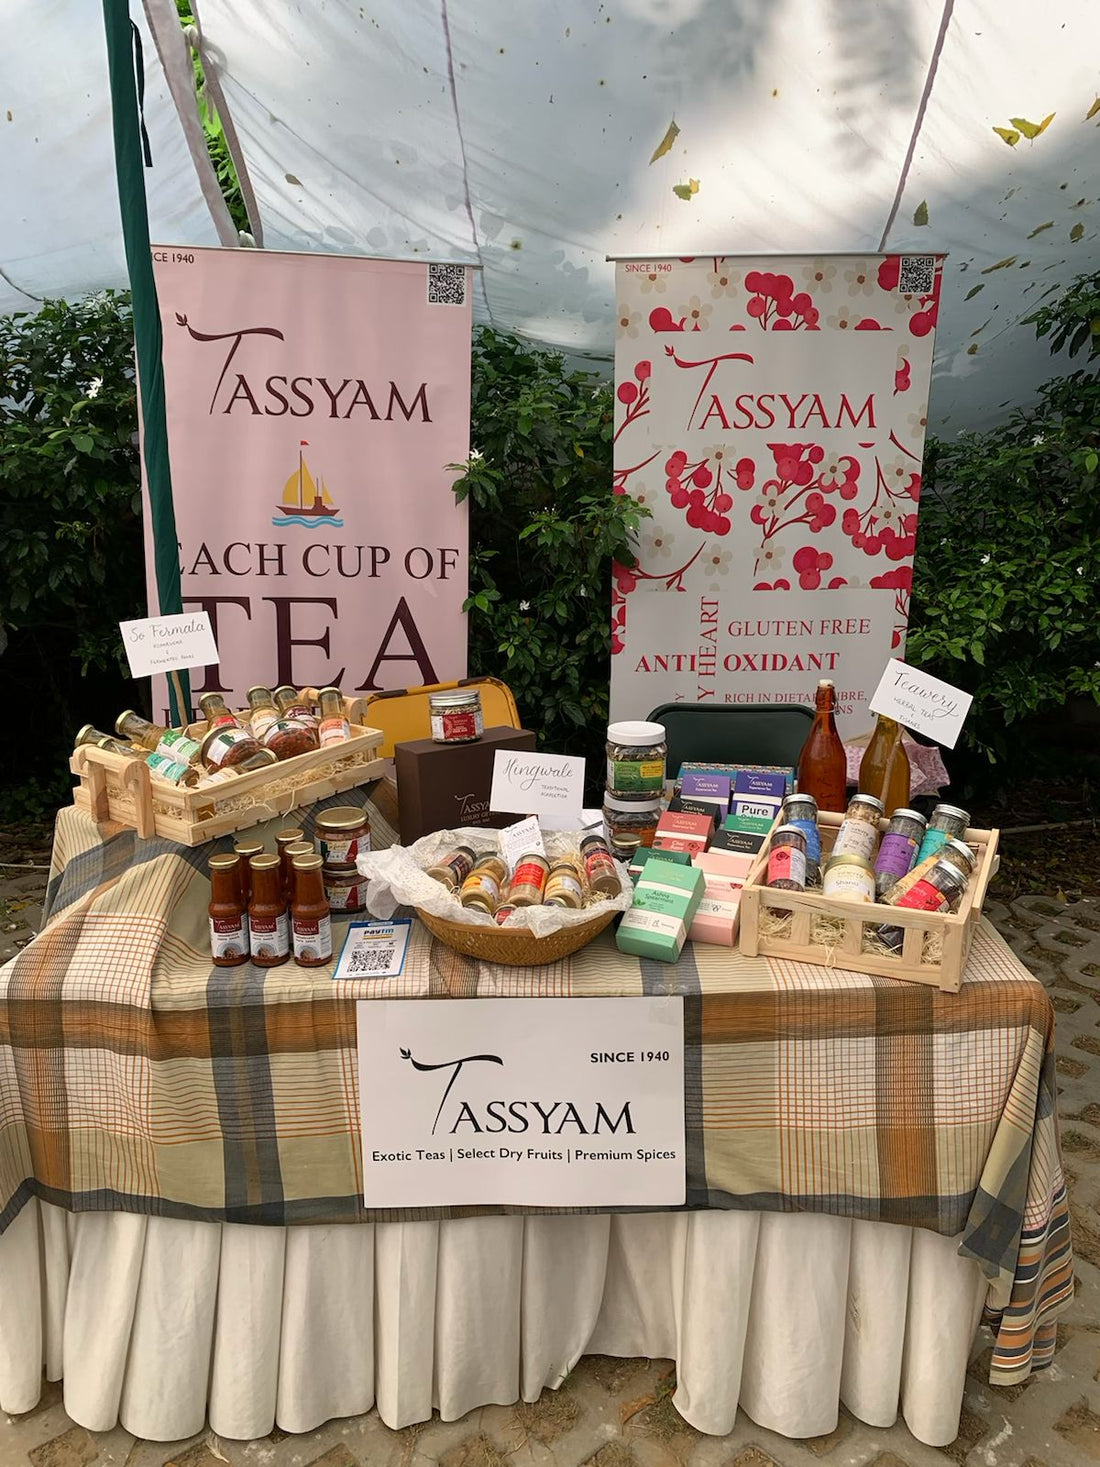 Tassyam at Earth Collective: Here's Everything You Need to Know About The Pop-up at Sunder Nursery - Tassyam Organics